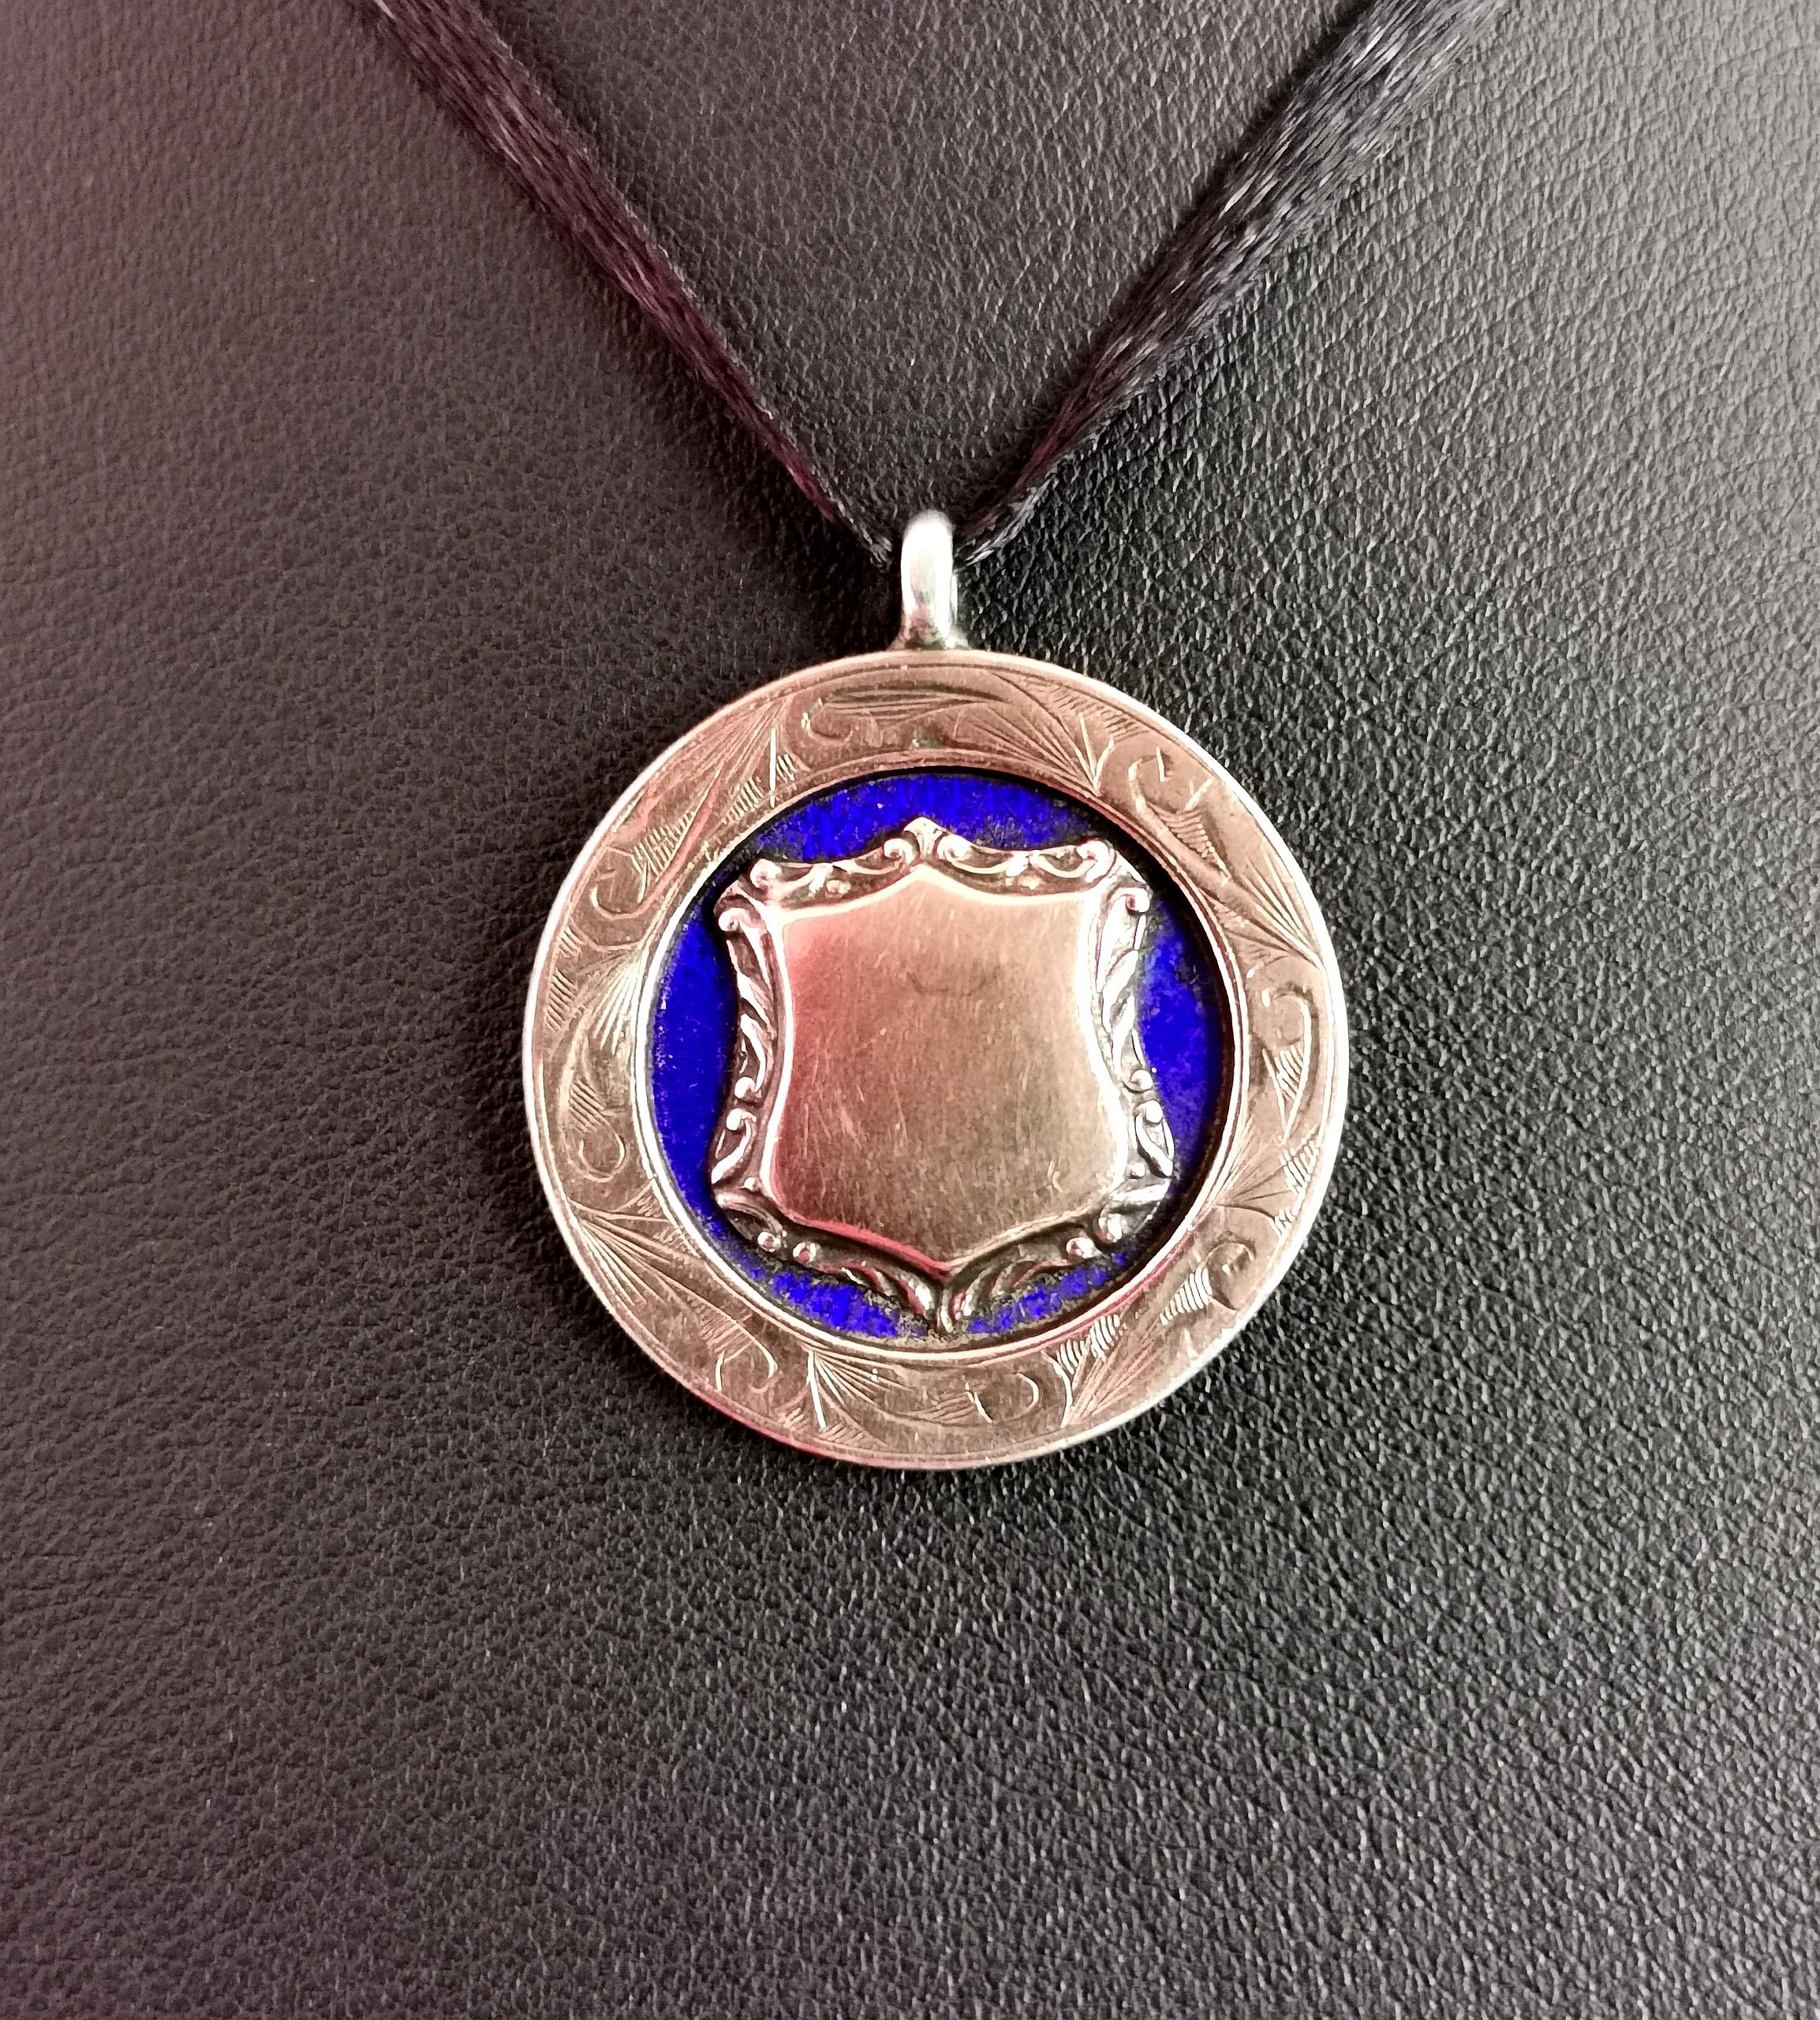 An attractive vintage, 1920's sterling silver, cobalt blue enamel and Rose gold plated fob pendant.

A decorative fob with a rose gold plated outer rim which is lightly engraved surrounding a rich cobalt blue guilloche enamel.

To the centre there